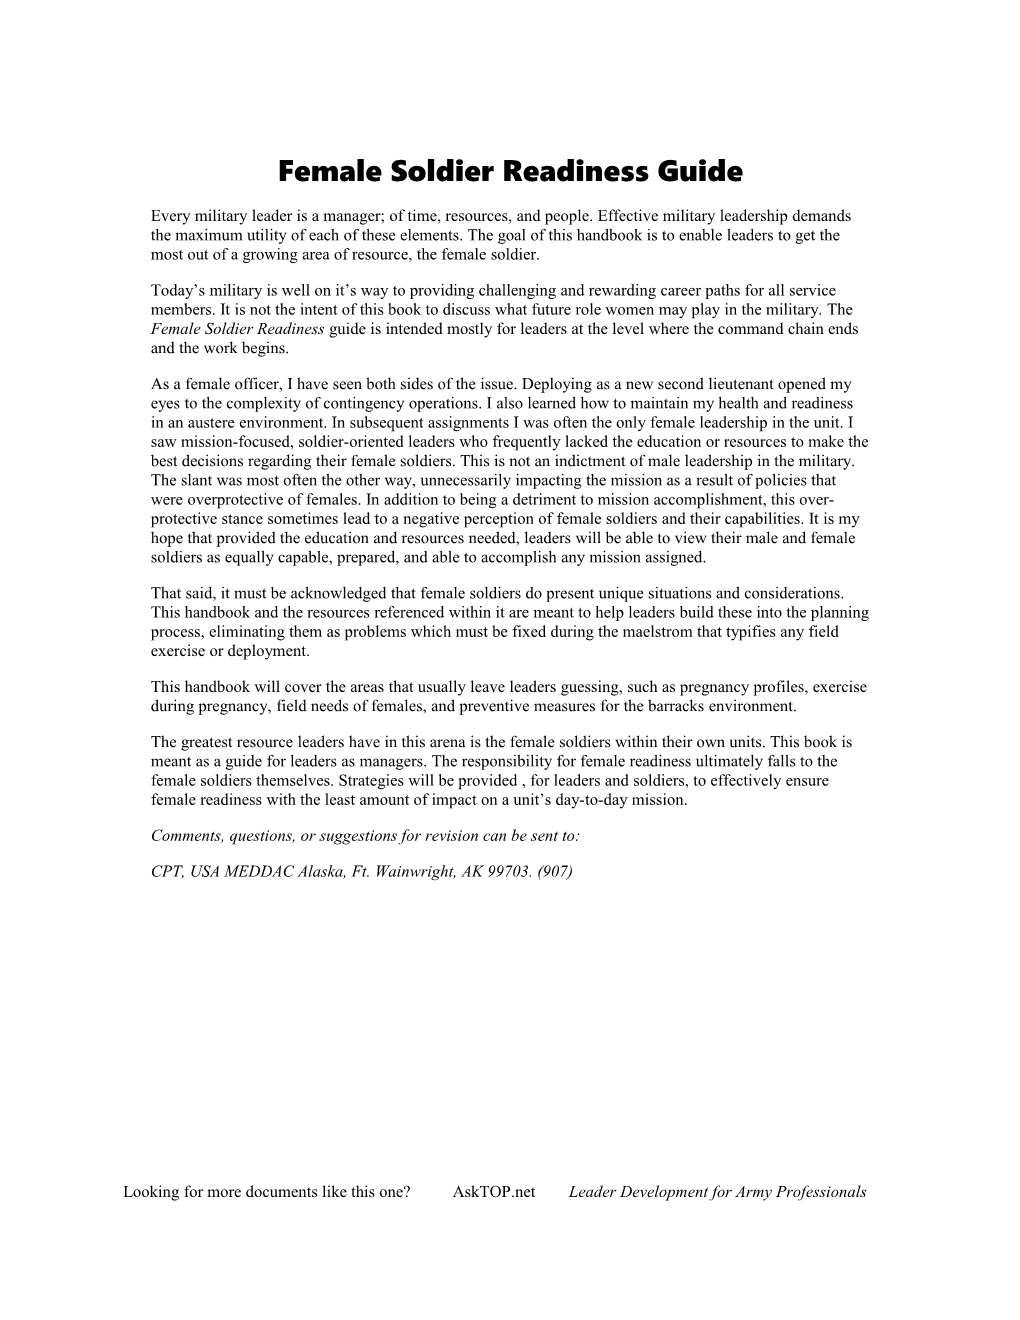 Female Soldier Readiness Guide